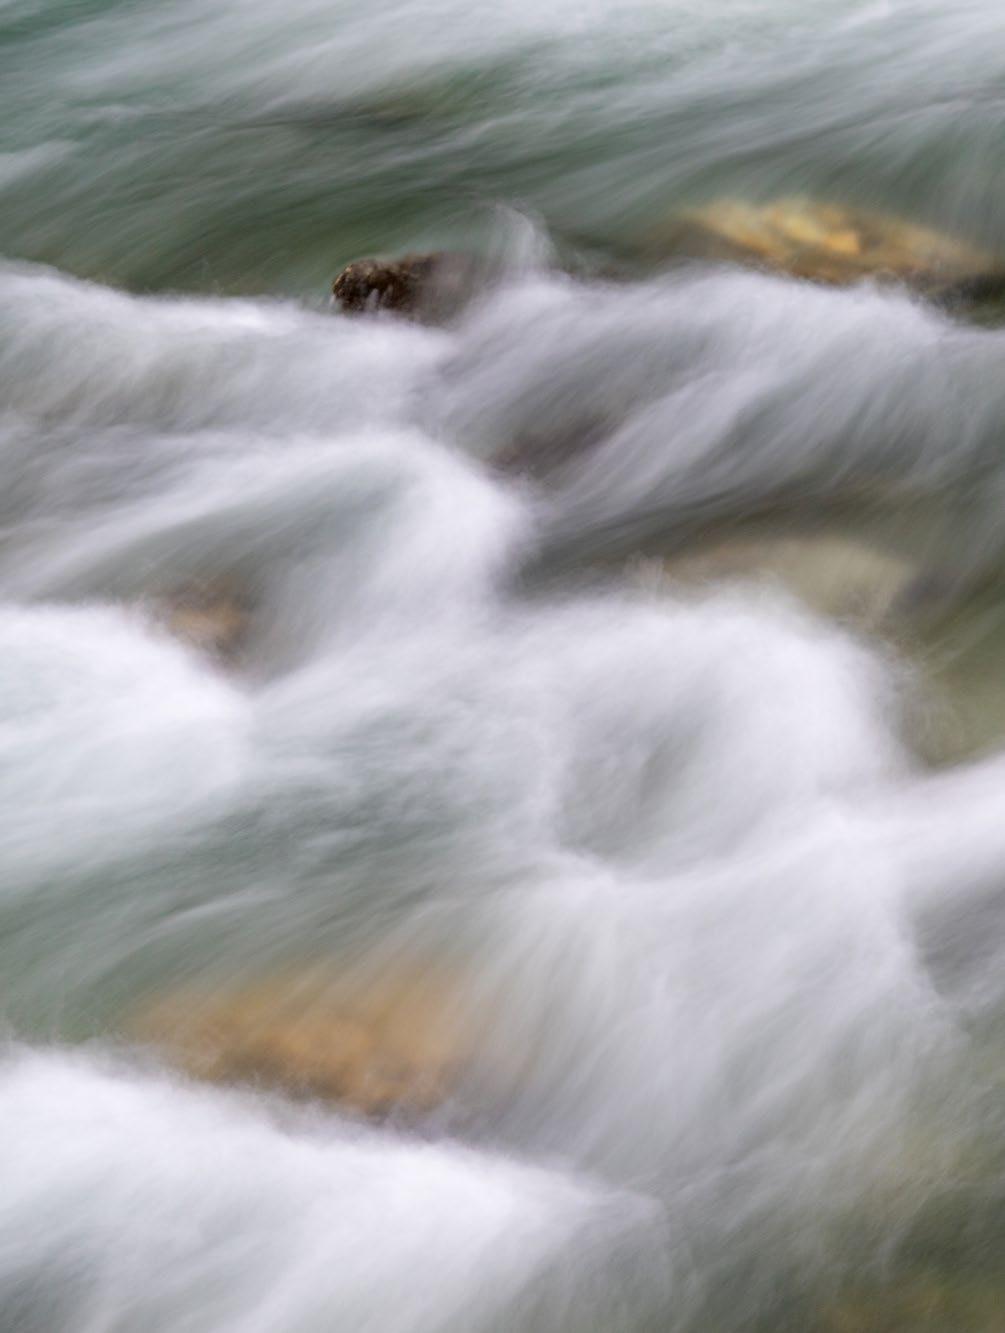 A long exposure produces interesting textures in a fast moving Alpine stream.